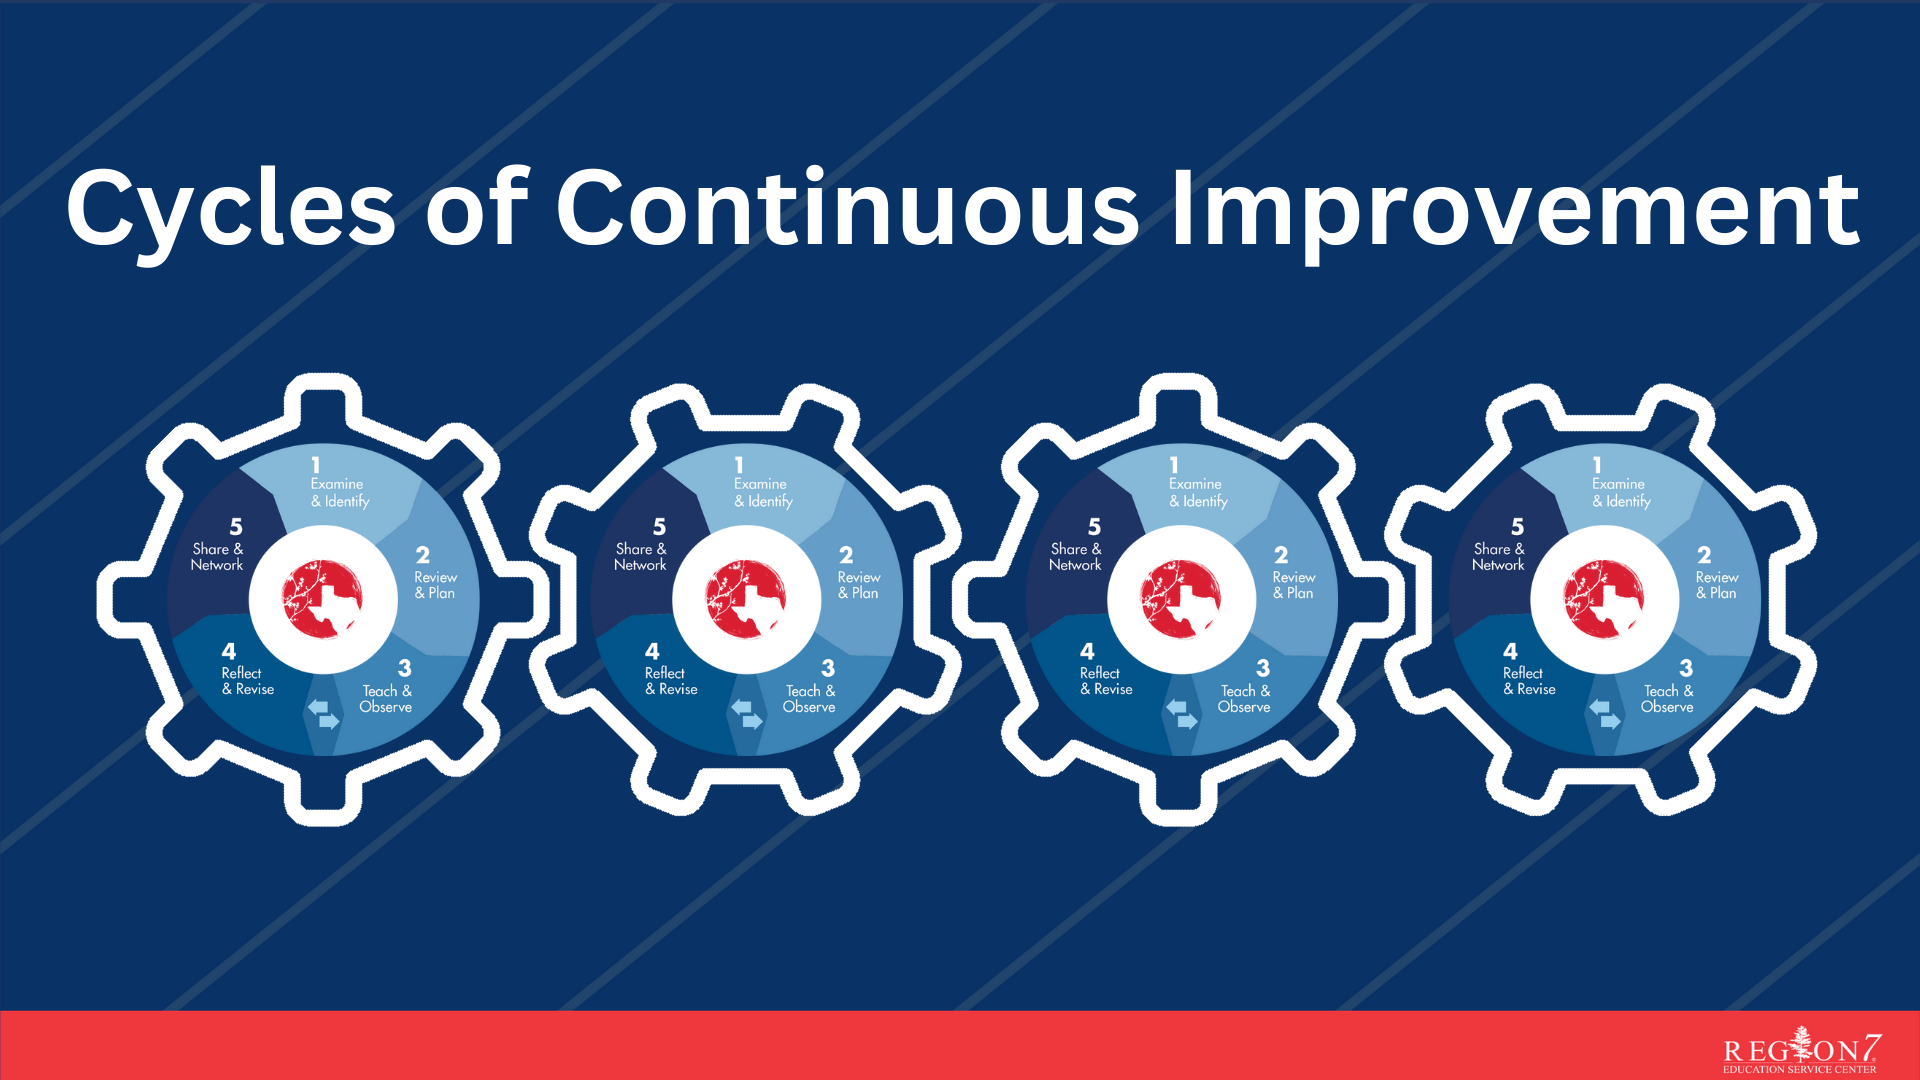 Cycles of Continuous Improvement